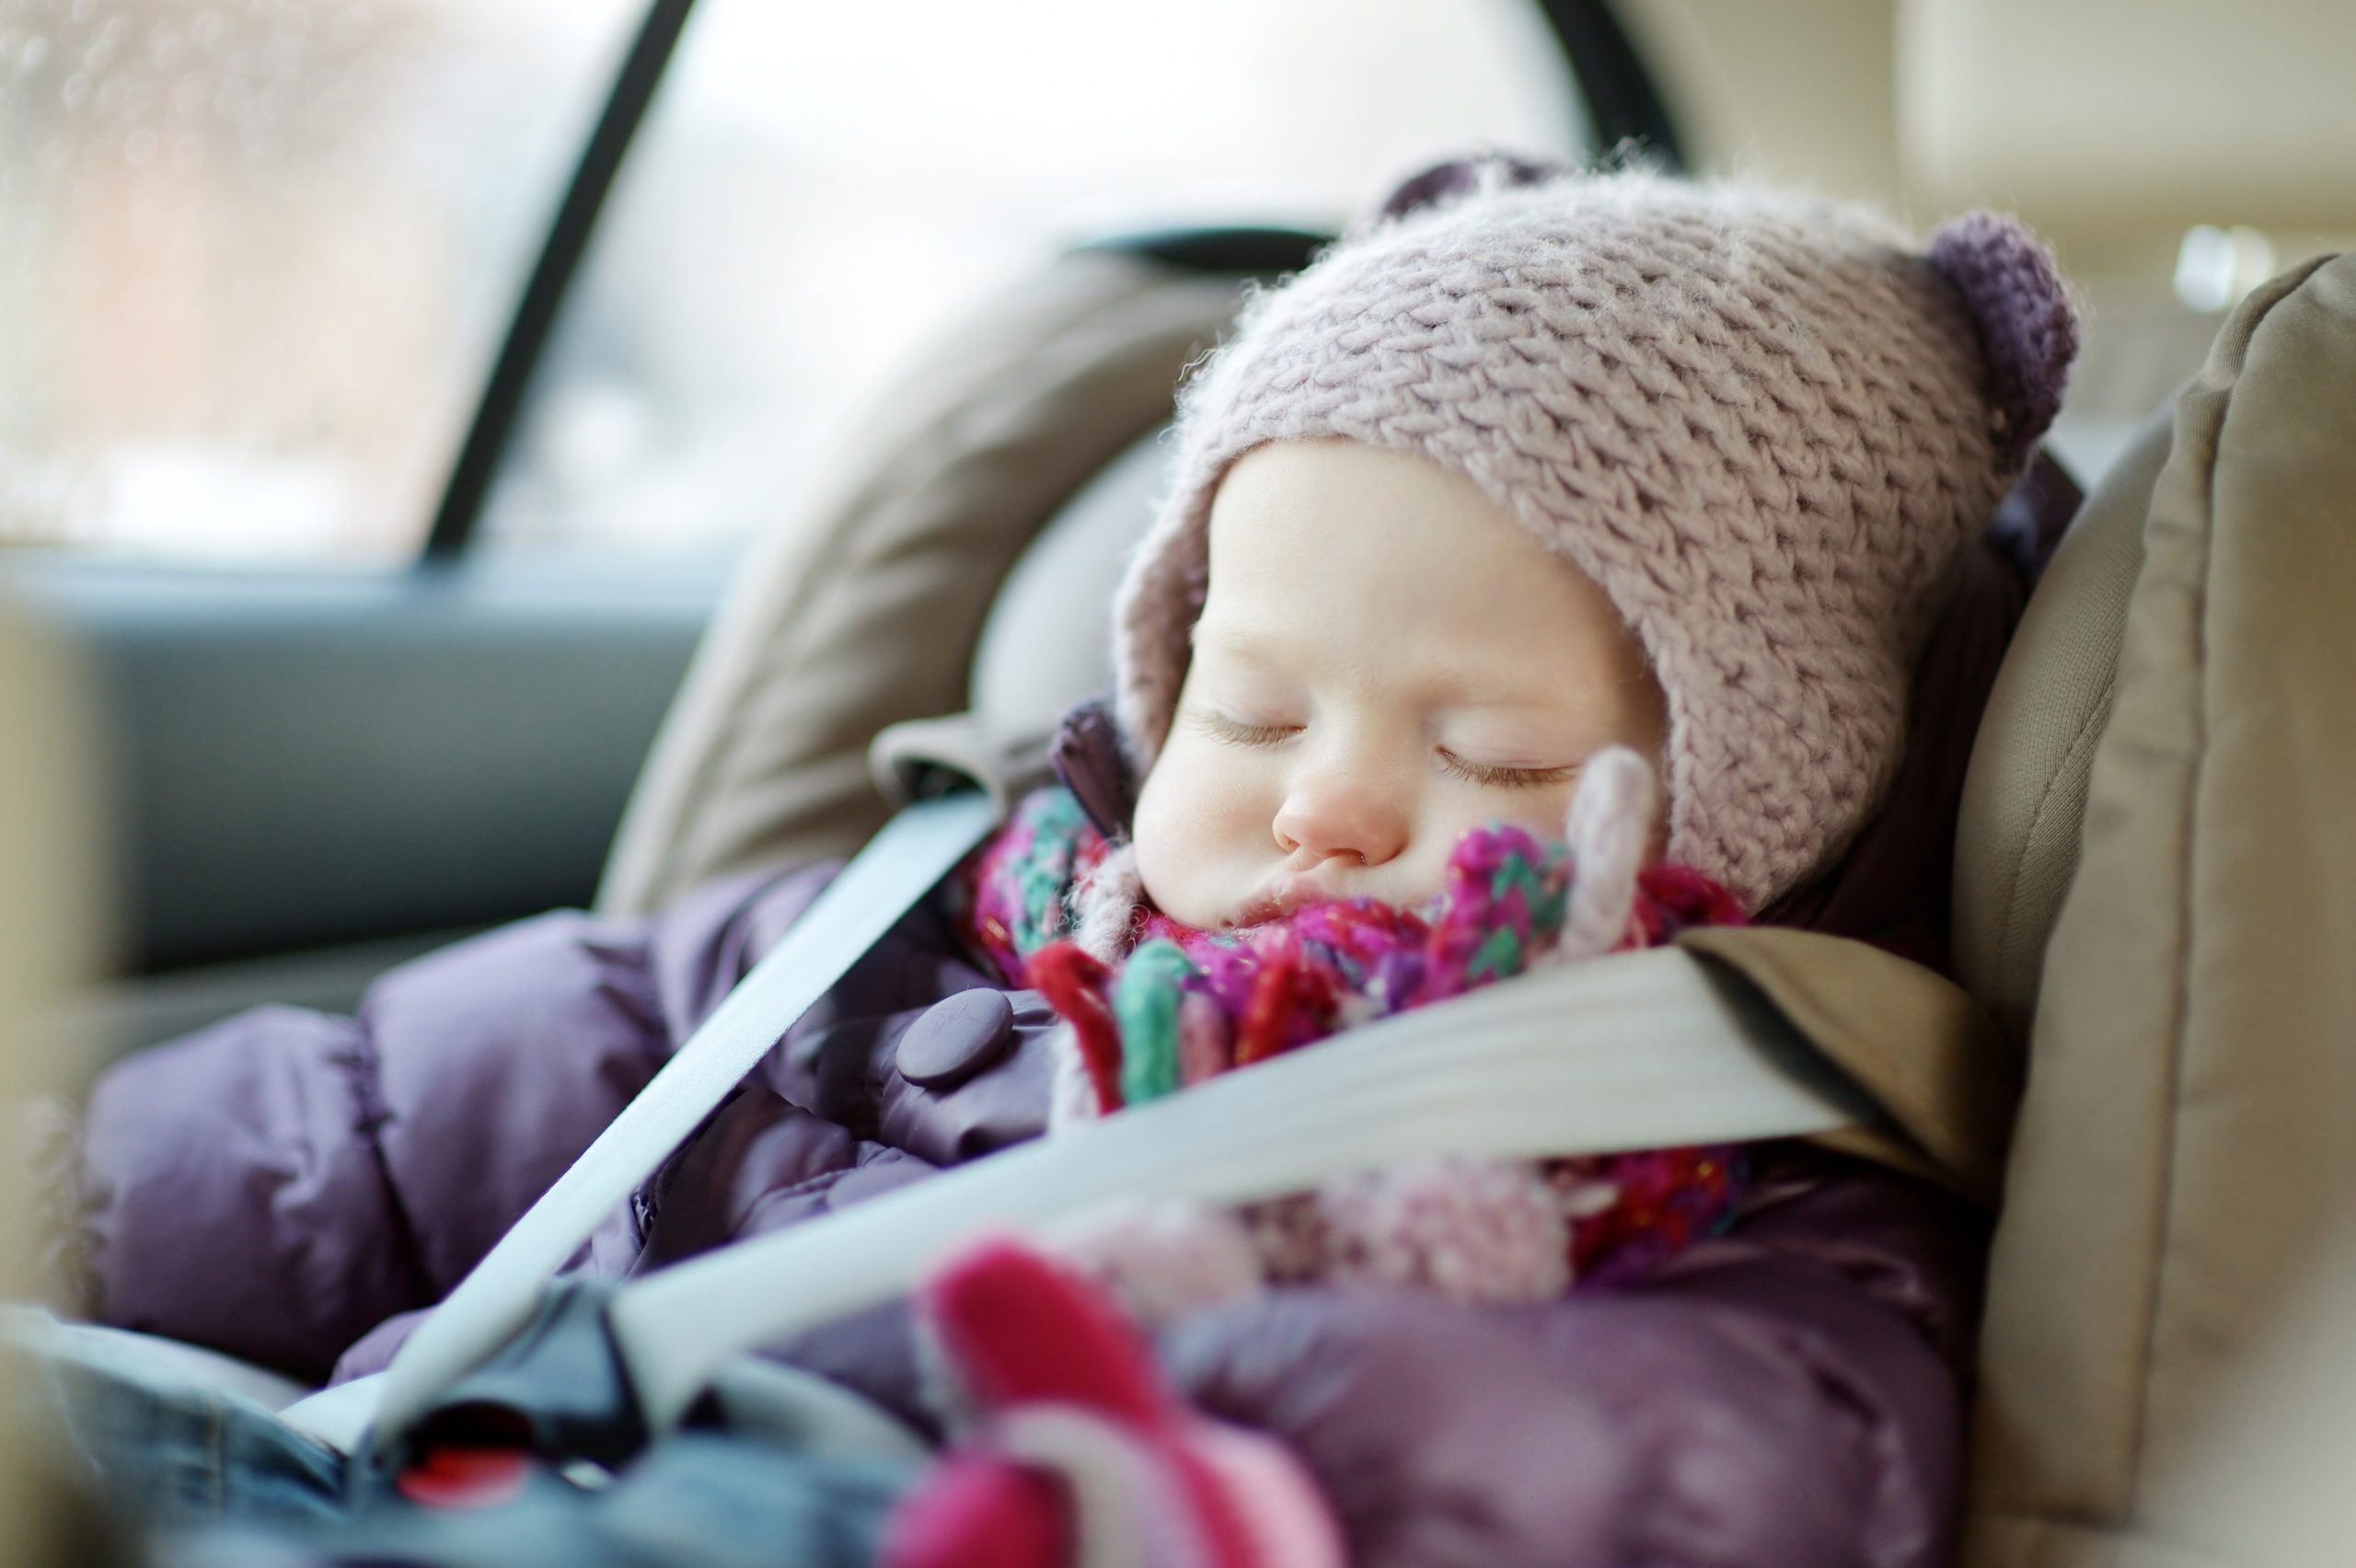 A winter coat is for playing in the snow, not in a #carseat